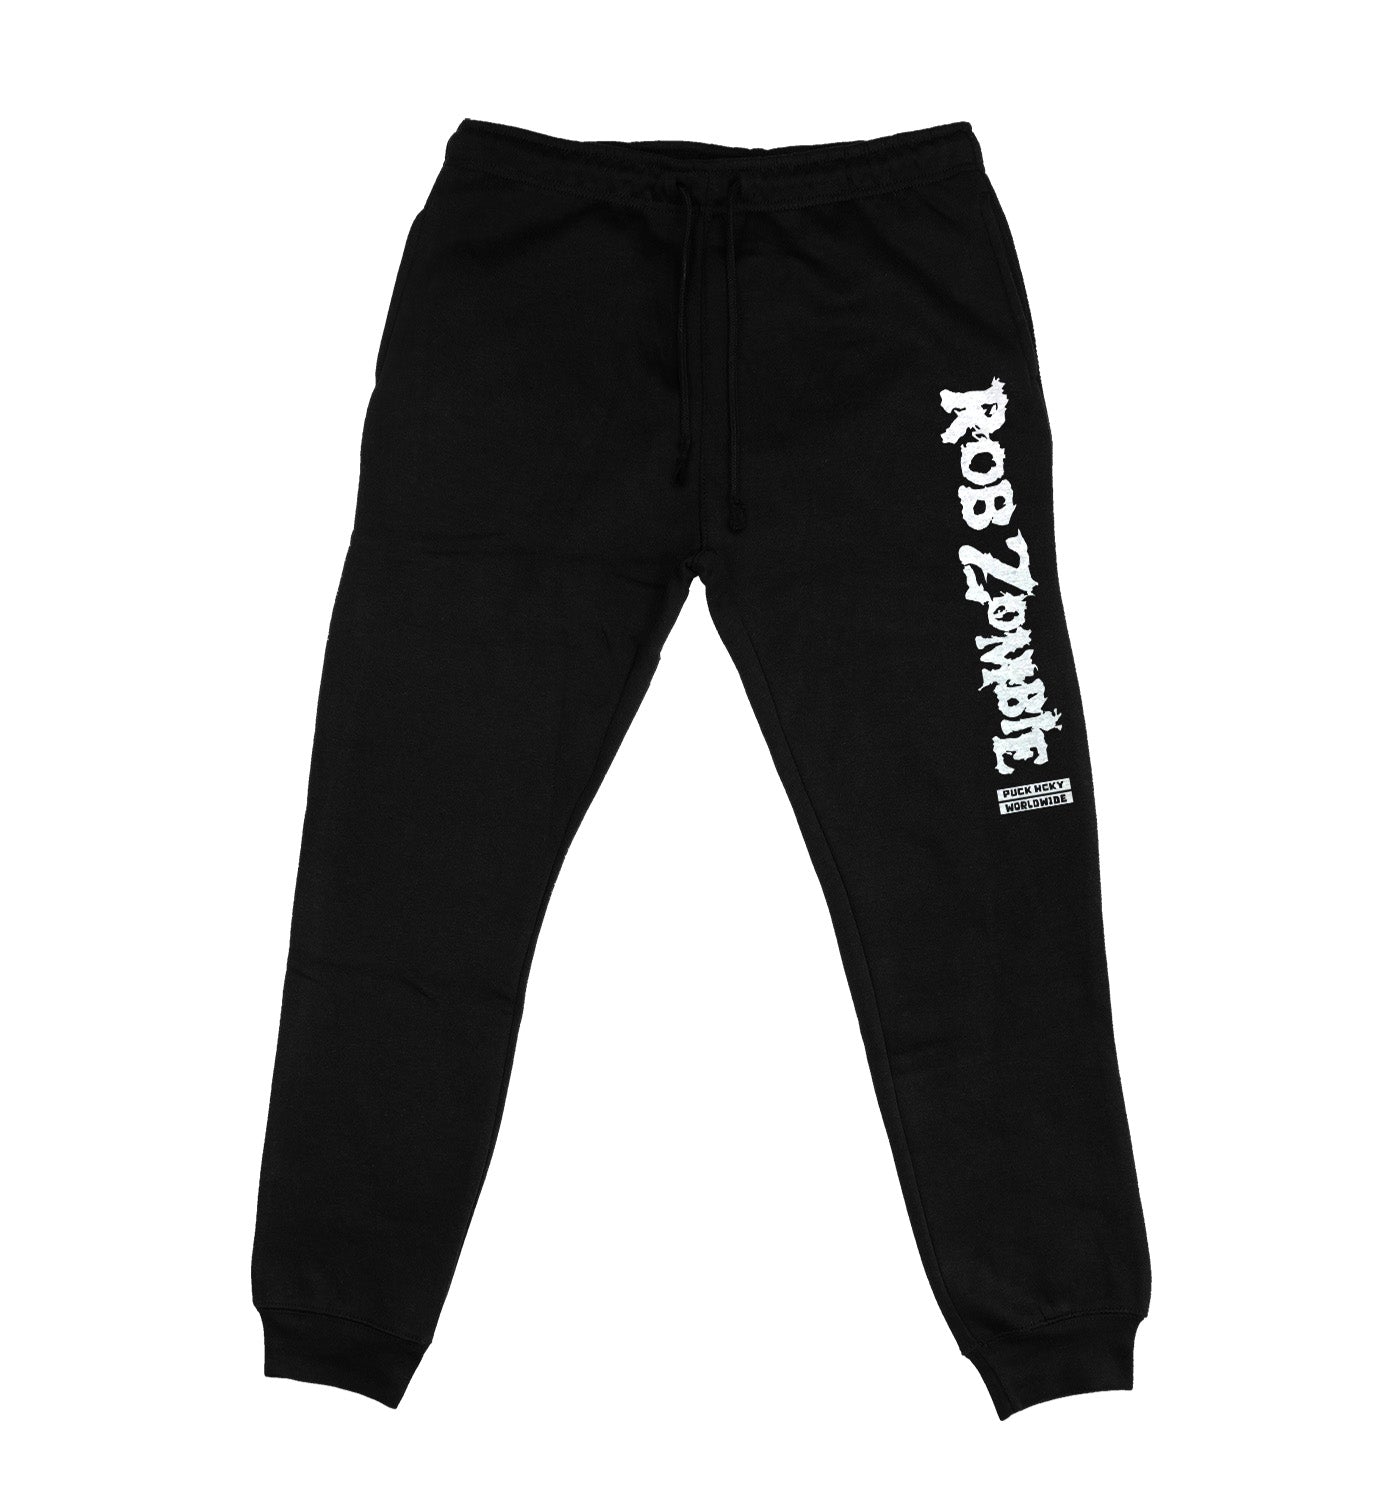 ROB ZOMBIE 'THUNDER FISTS 65' PERFORMANCE JOGGERS – PUCK HCKY